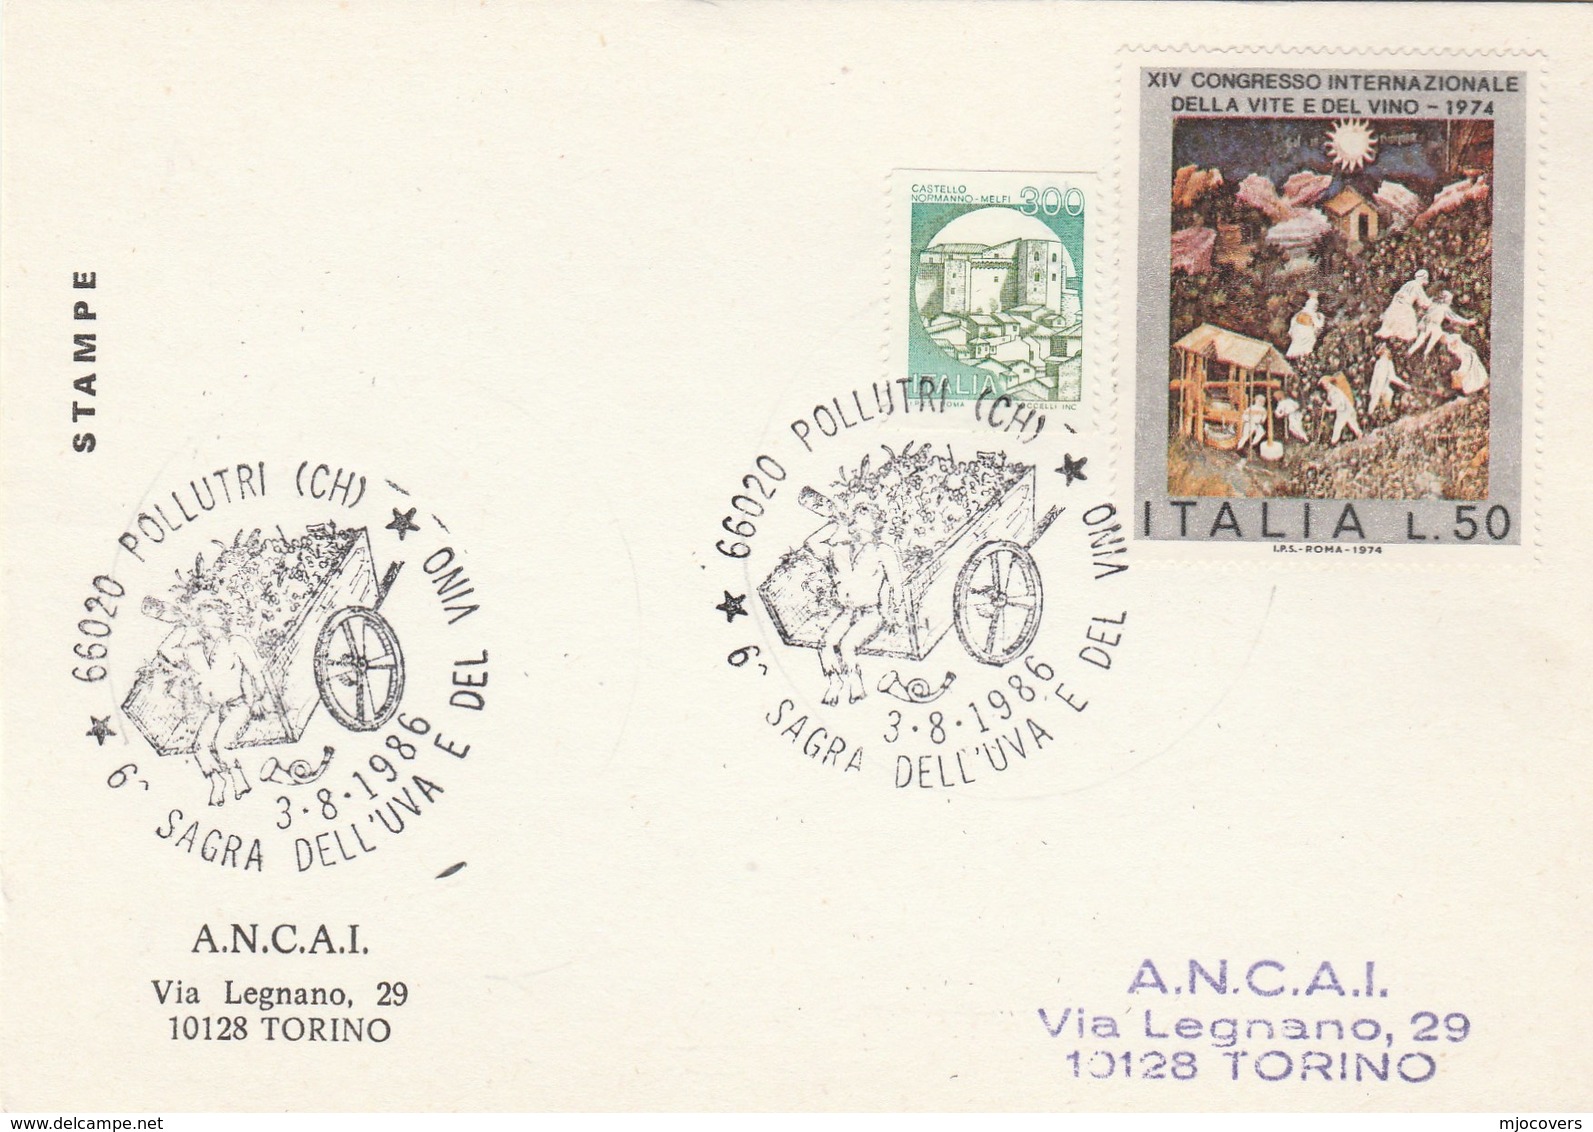 1986 ITALY Pollutri WINE EVENT COVER Card Stamps Grapes Alcohol Drink - Wines & Alcohols